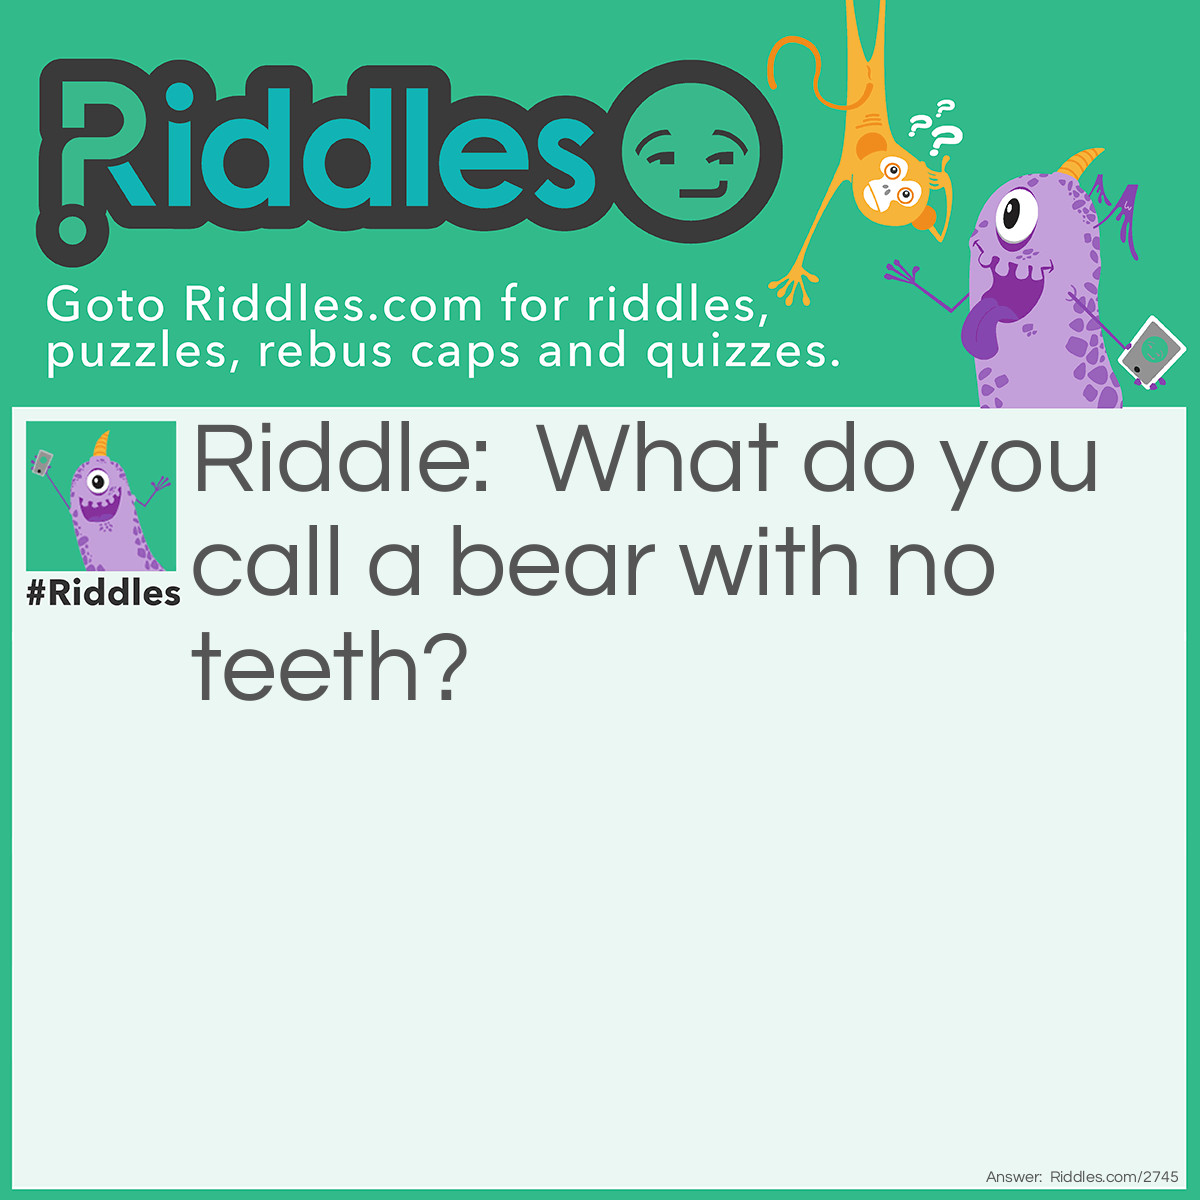 Riddle: What do you call a bear with no teeth? Answer: A gummy Bear.